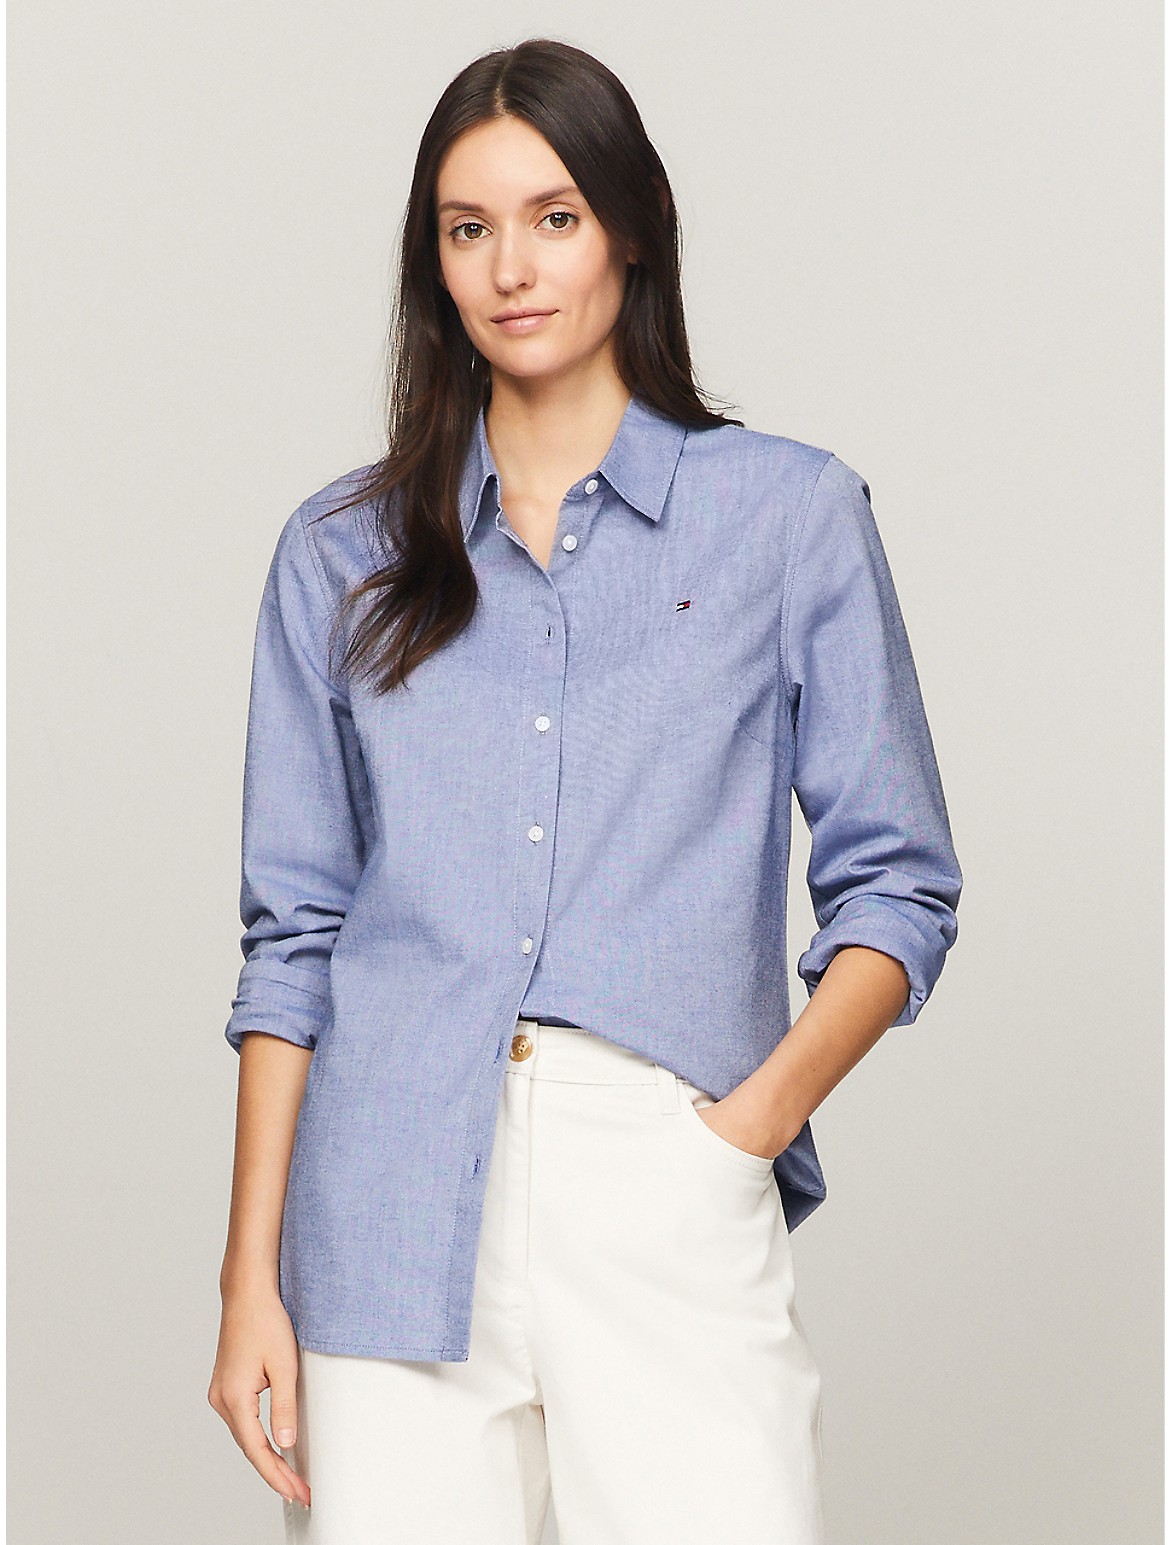 Tommy Hilfiger Women's Solid Chambray Shirt